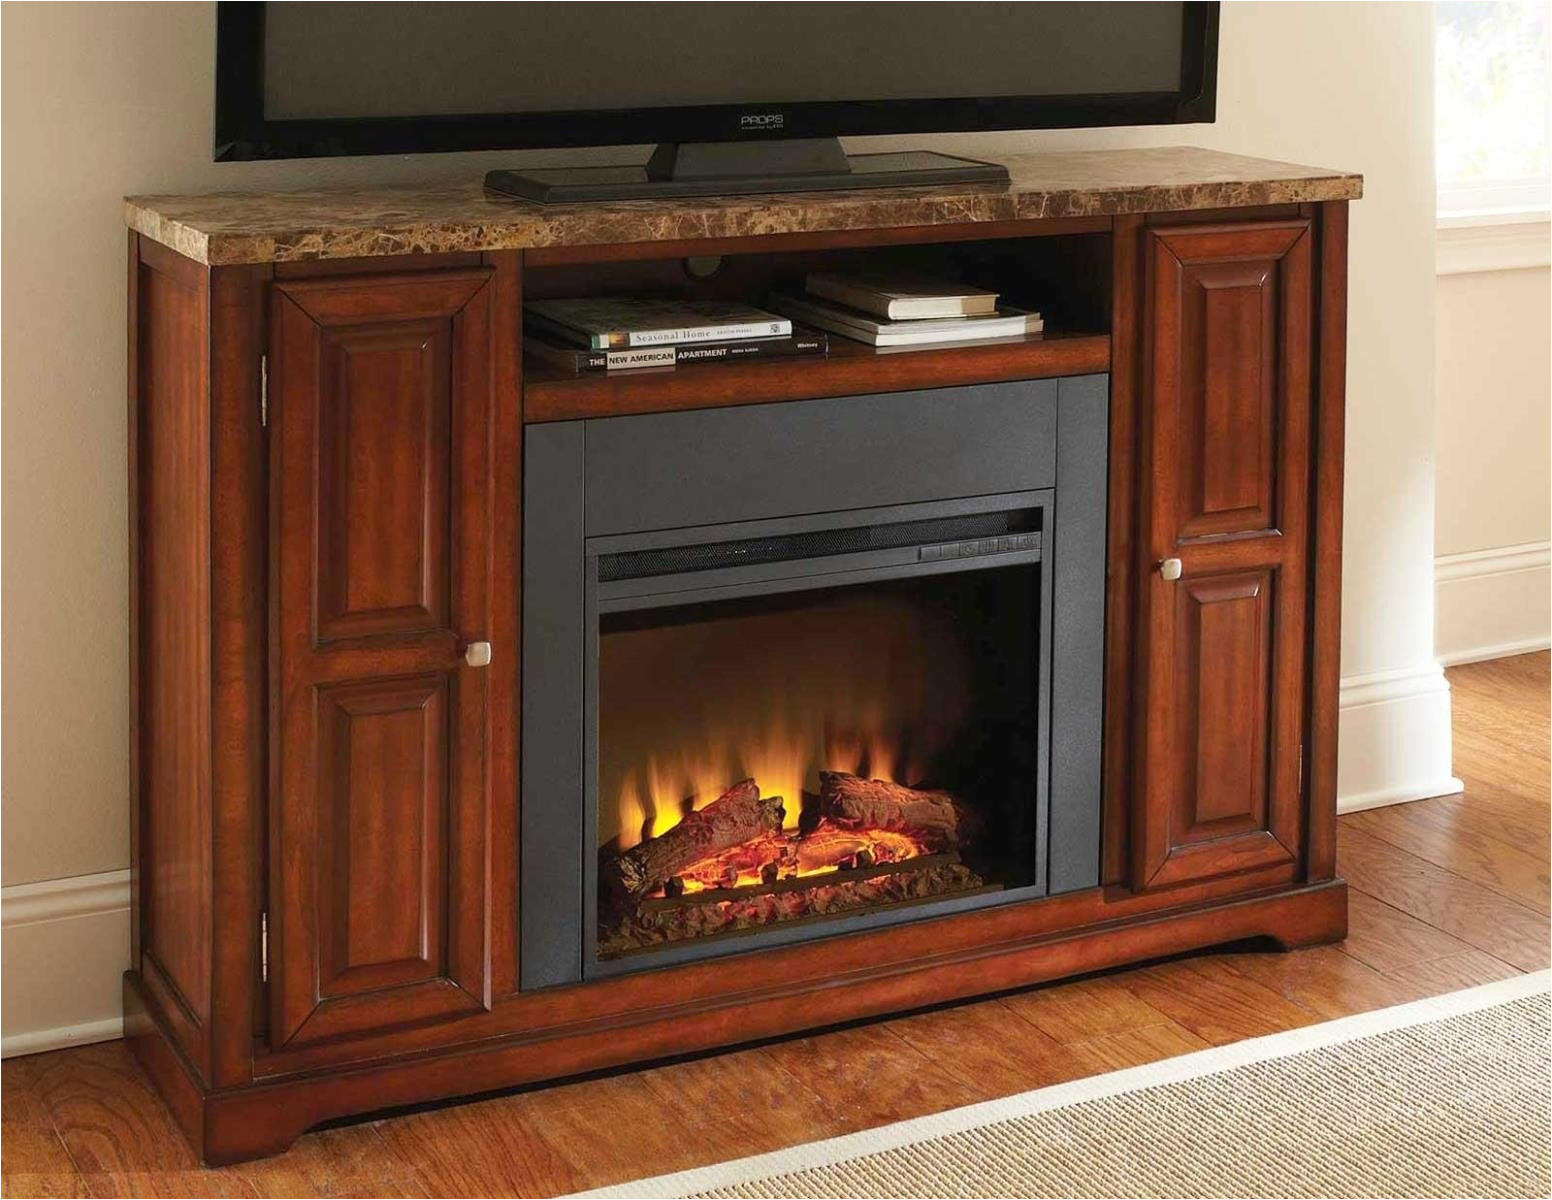 Ember Hearth Electric Fireplace Costco
 Ember Hearth Electric Fireplace Media Console Costco